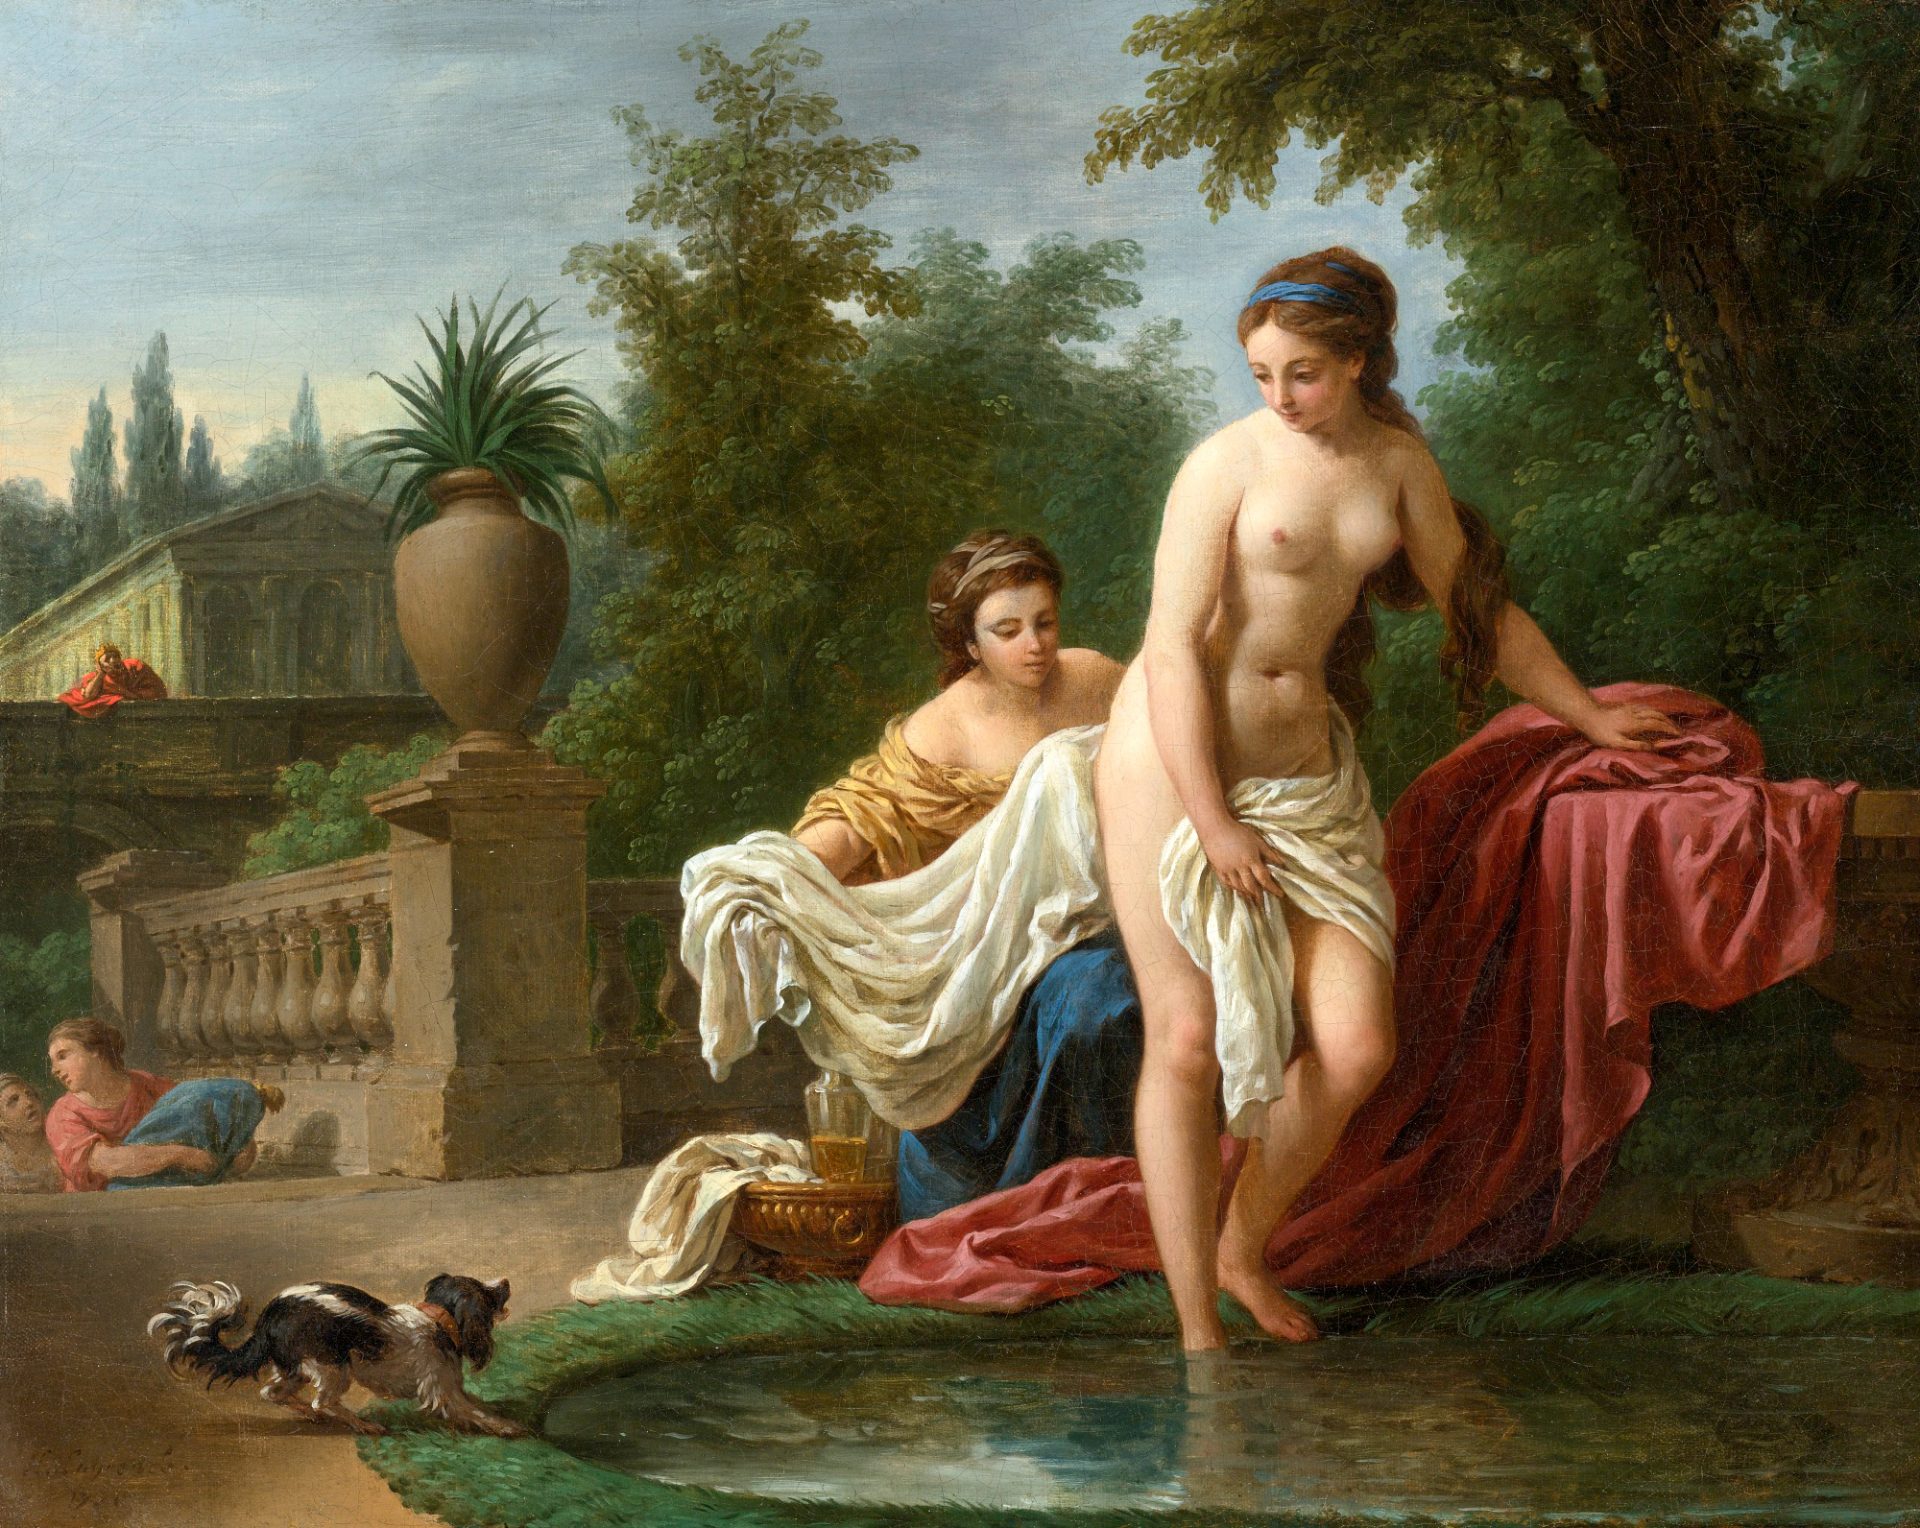 A serene painting by Louis-Jean-François Lagrenée from 1770 titled 'David and Bathsheba'. The artwork portrays Bathsheba, a beautiful woman with flowing hair, standing near a water's edge, her delicate form modestly draped in white fabric. Beside her sits a maidservant in golden attire, attentively handing her a garment. In the background, King David is observing her from far, near a grand, classical structure with ornate pillars. A small dog, excitedly splashing water, adds life to the tranquil scene. Lush trees and foliage frame the composition, creating a sense of privacy and intimacy.